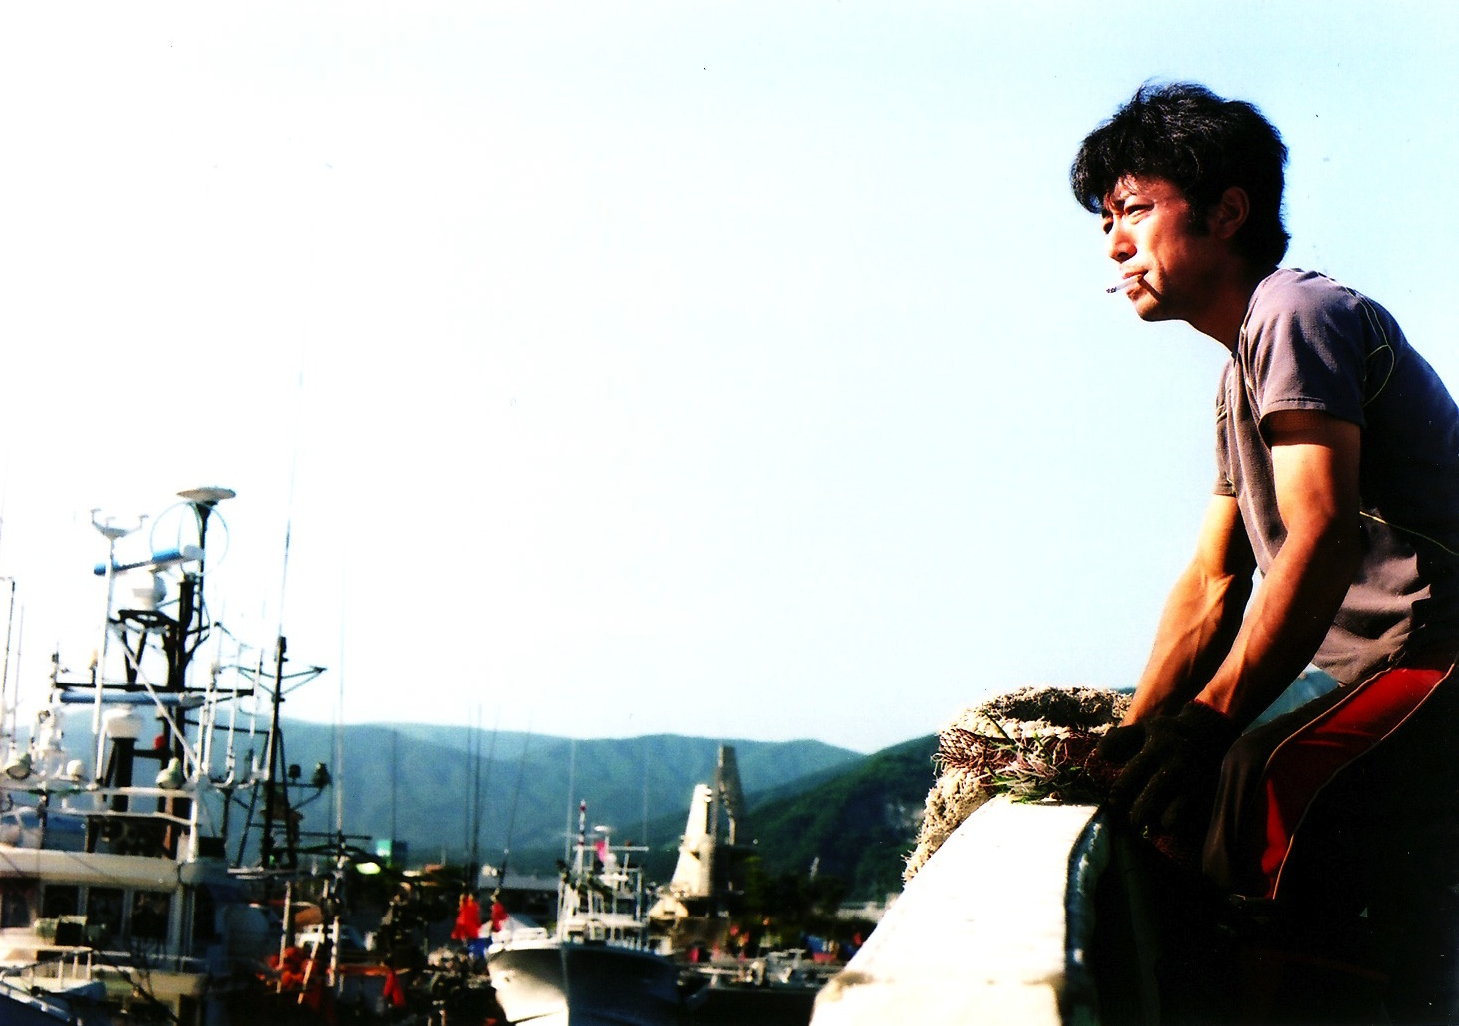 Chiba-san’s chief engineer, who saved his captain’s boat – and life – by preparing the ship for departure immediately after the earthquake. (photo by Daniel Hoshizaki)